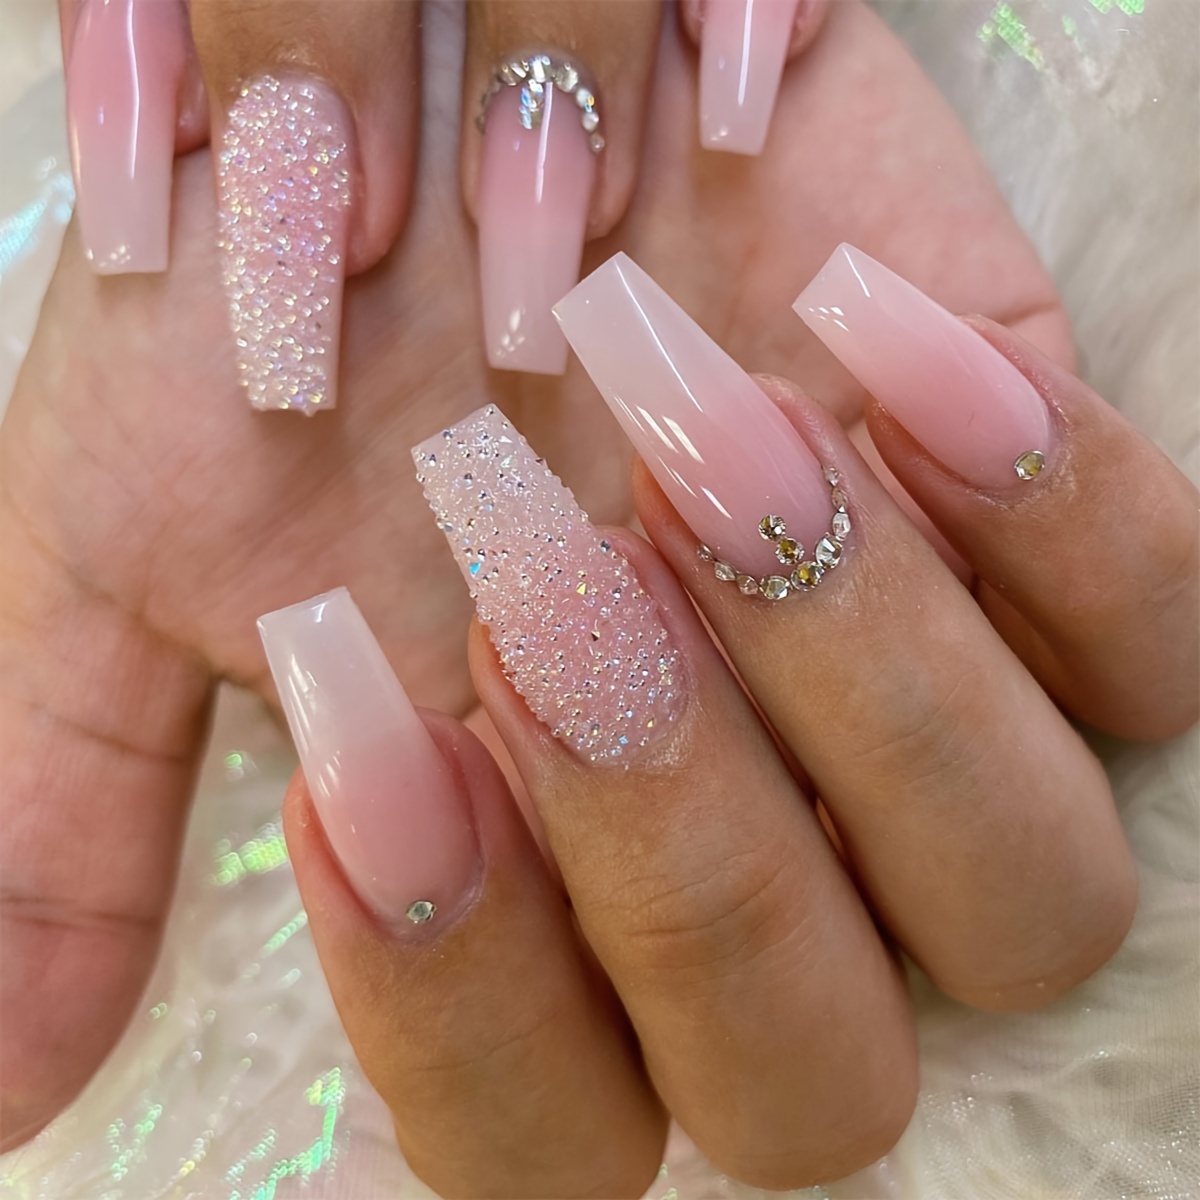 

24pcs/set Pinkish And White Gradient Press On Nails Glitter Rhinestone With Design, Glossy Long Ballet Fake Nails, Sweet Acrylic Artificial Nails For Women Girls